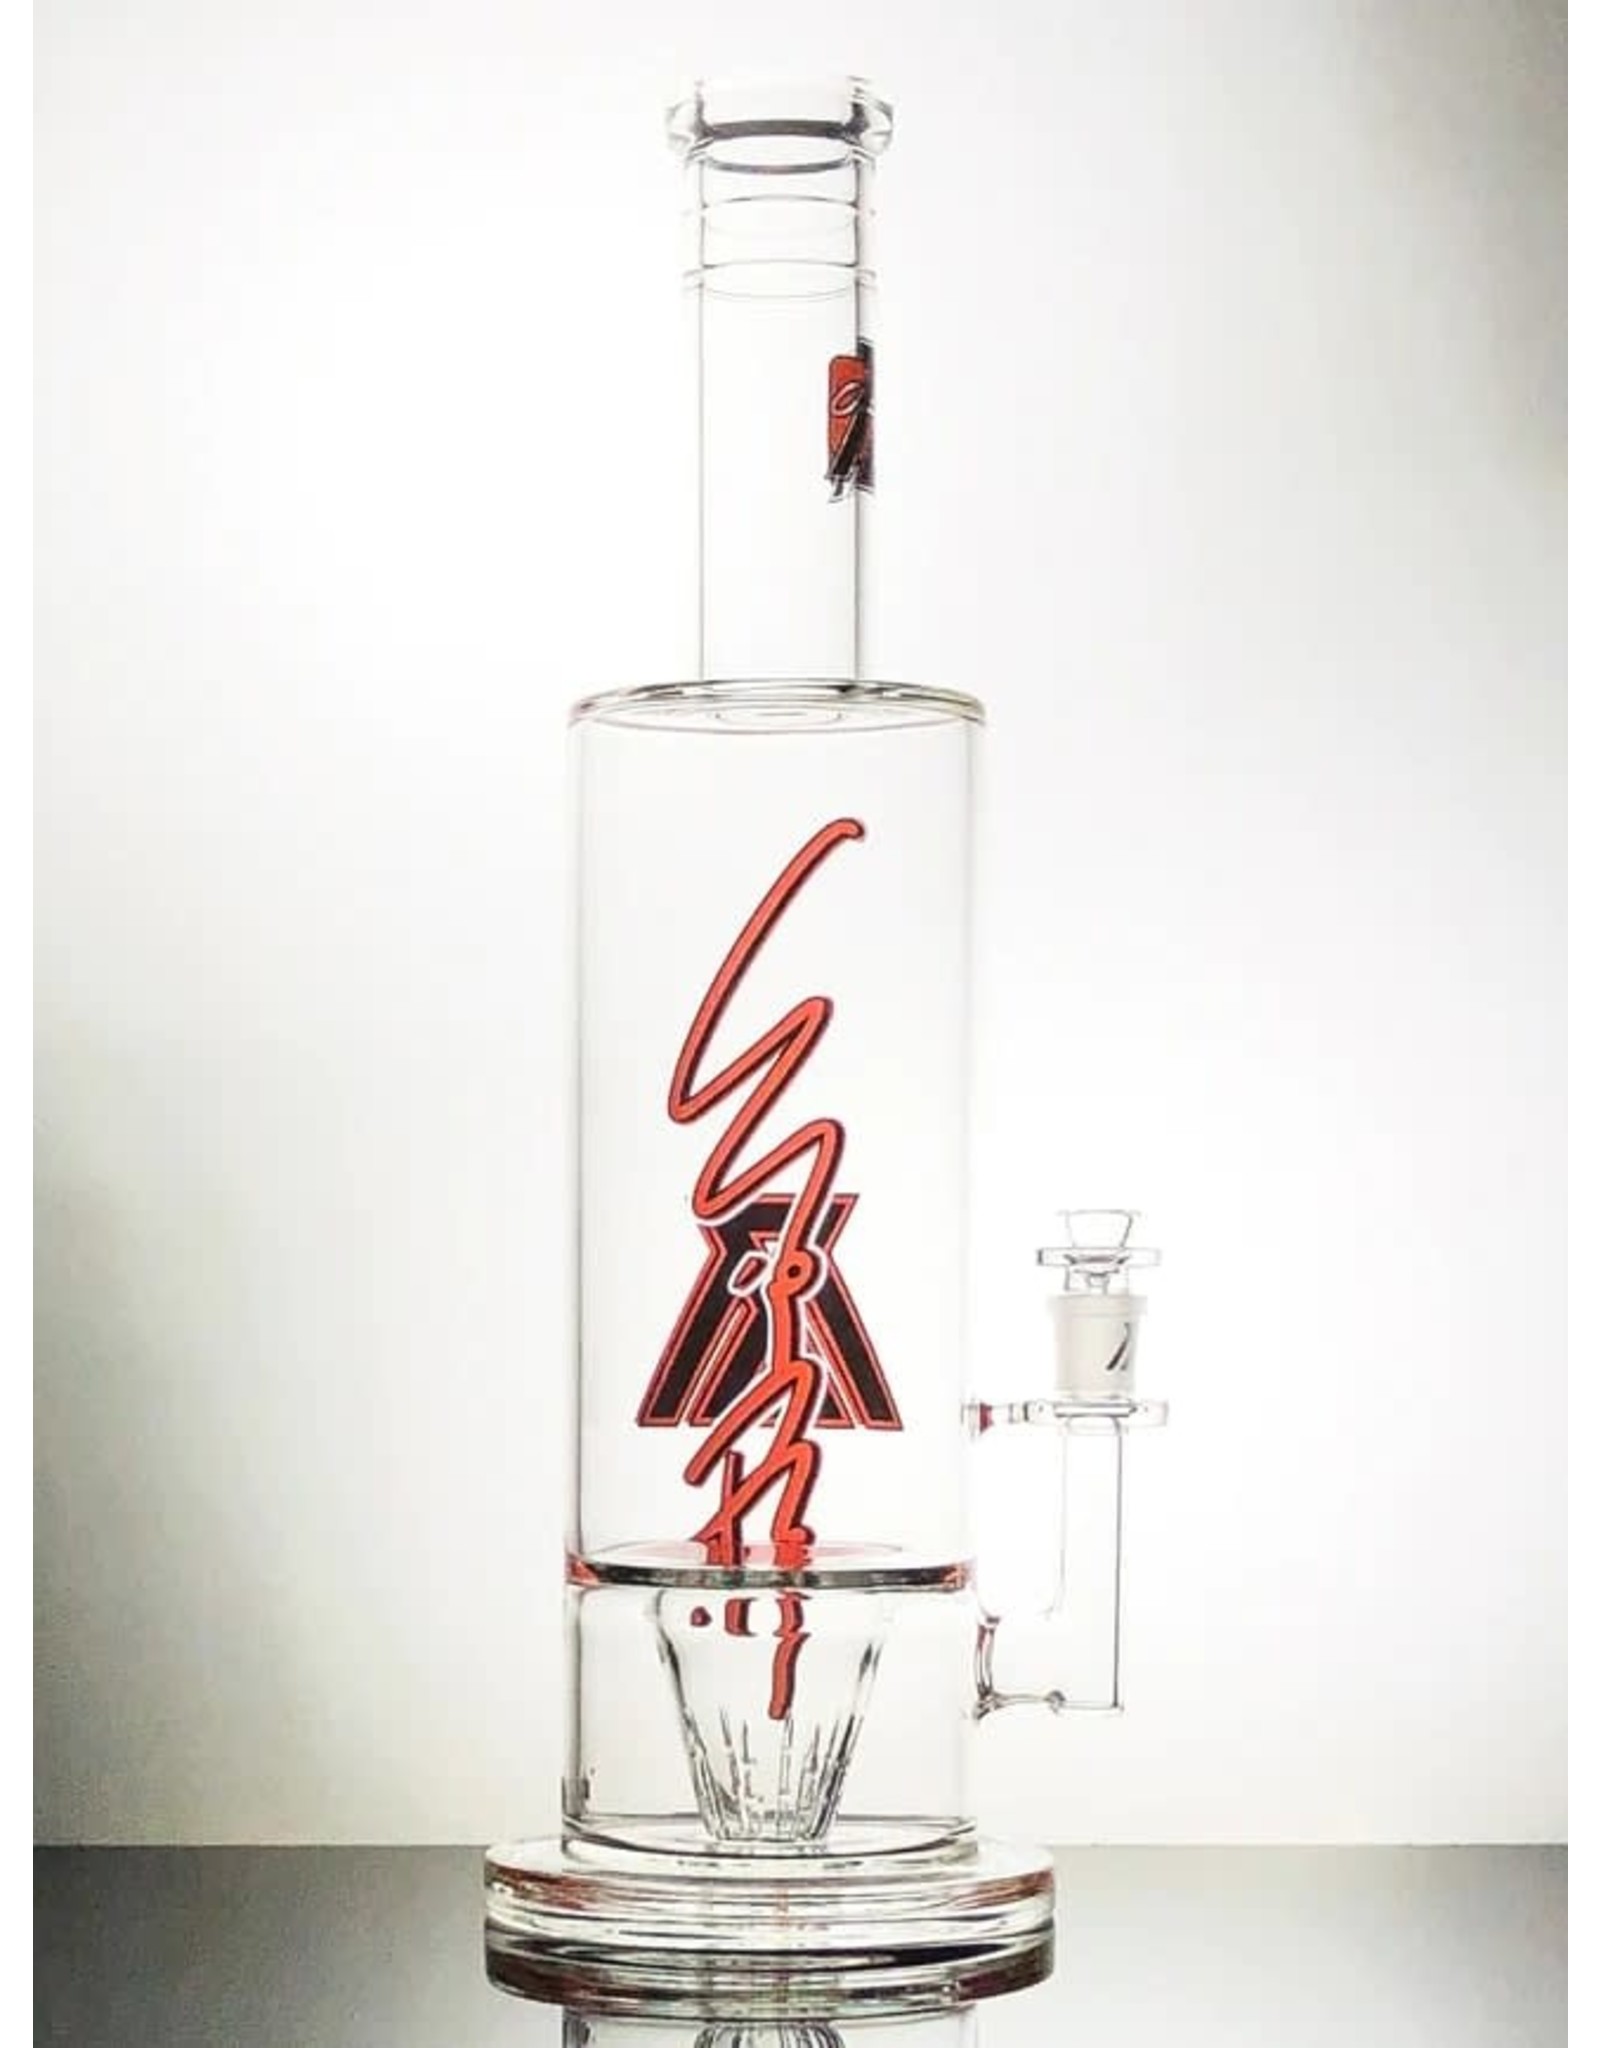 Moltn 110mm Tall Single Gyzr Perc 12" Base And 6" Neck